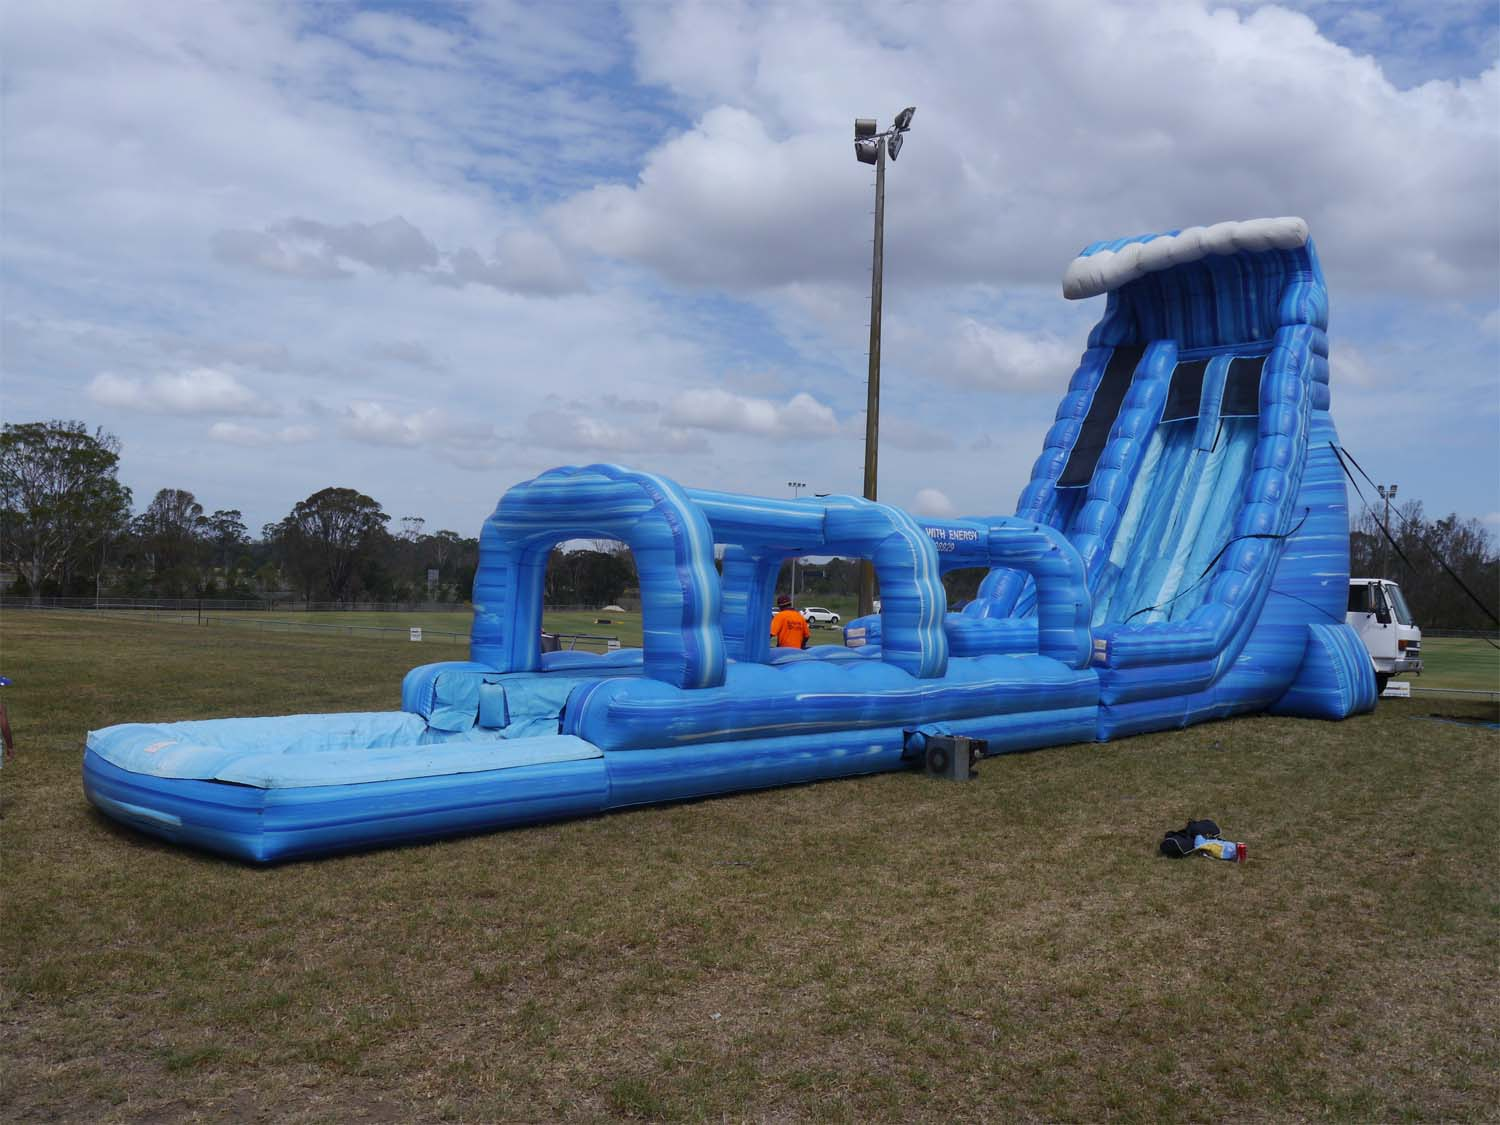 Commercial inflatable water slide games playground outdoor inflatable toy